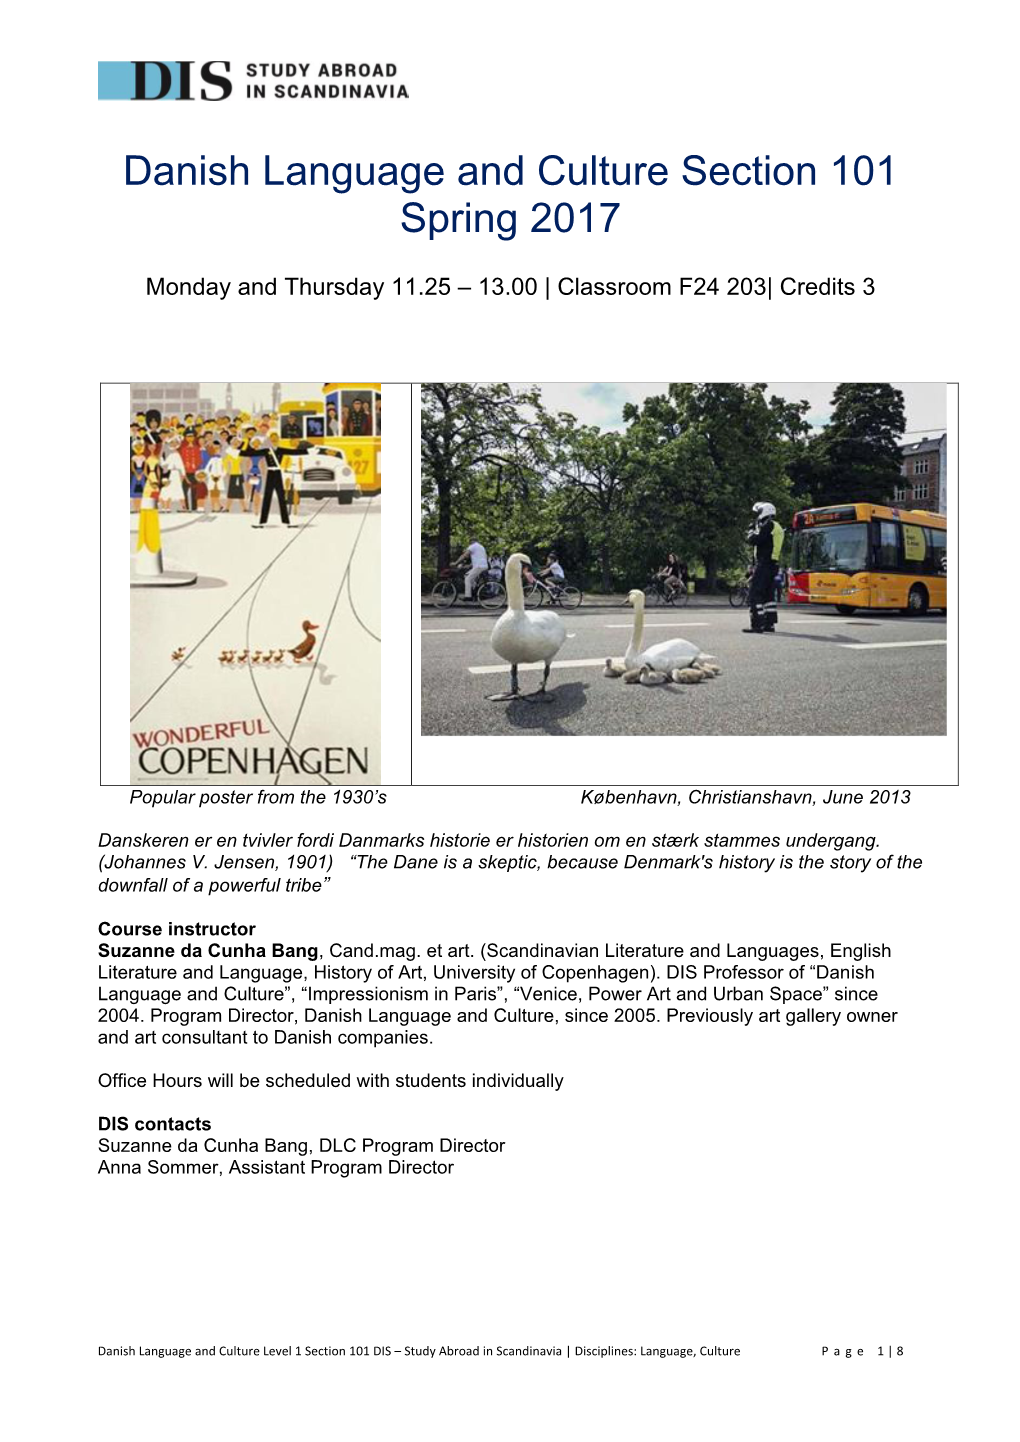 Danish Language and Culture Section 101 Spring 2017